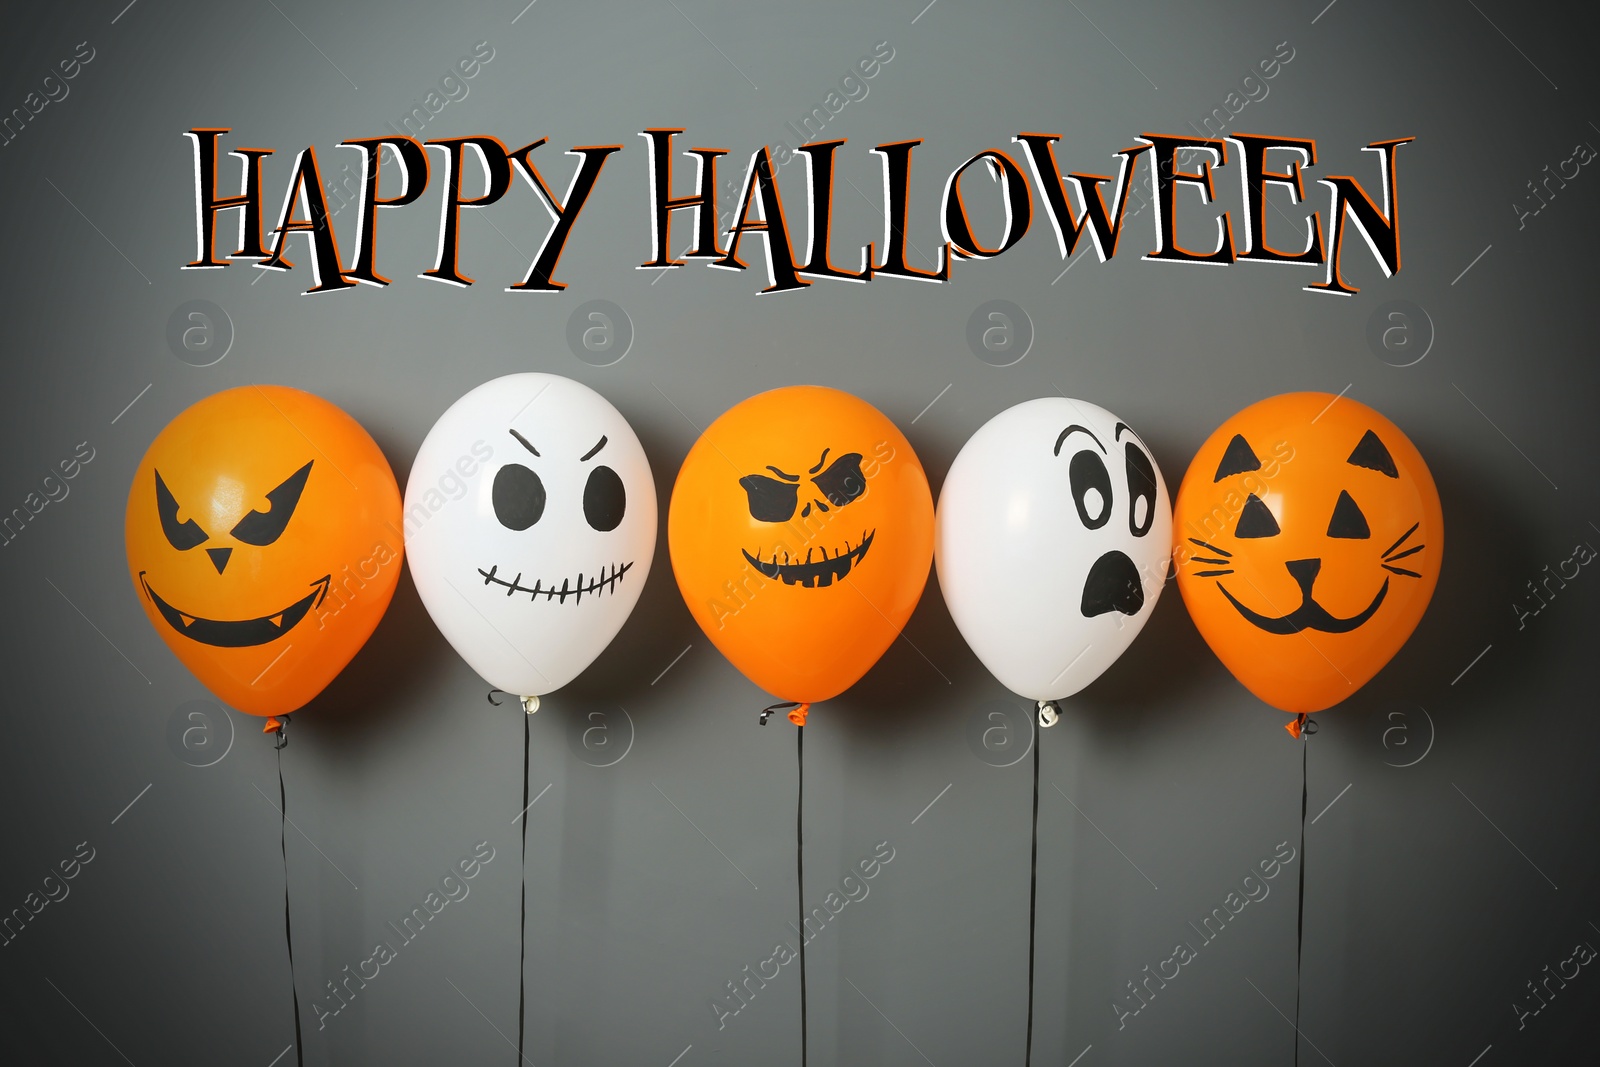 Image of Happy Halloween greeting card design. Color balloons with drawn spooky faces on grey background